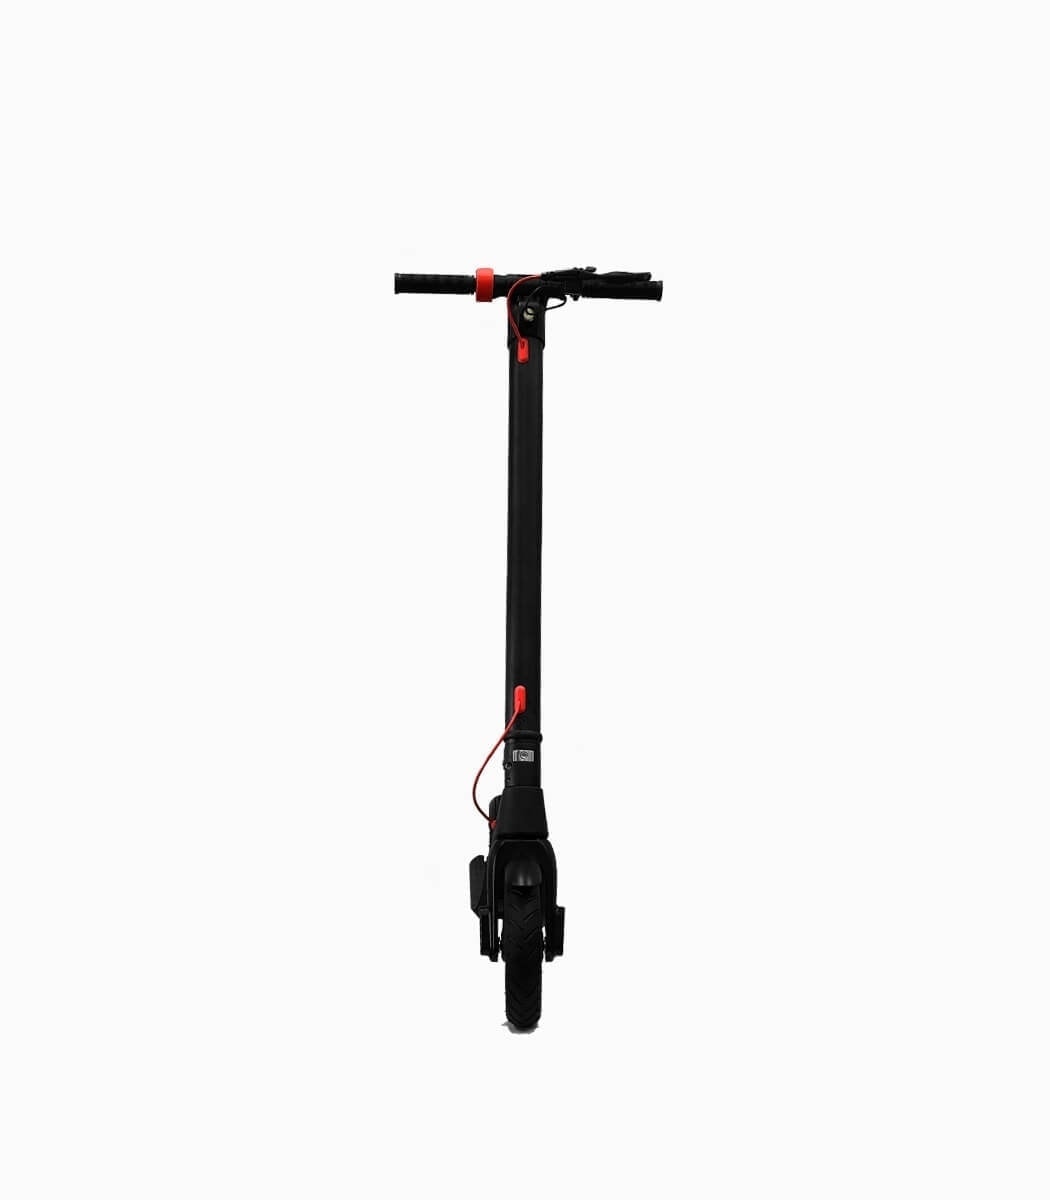 MOBOT X7 (BLACK6.4AH) UL2272 electric scooter front